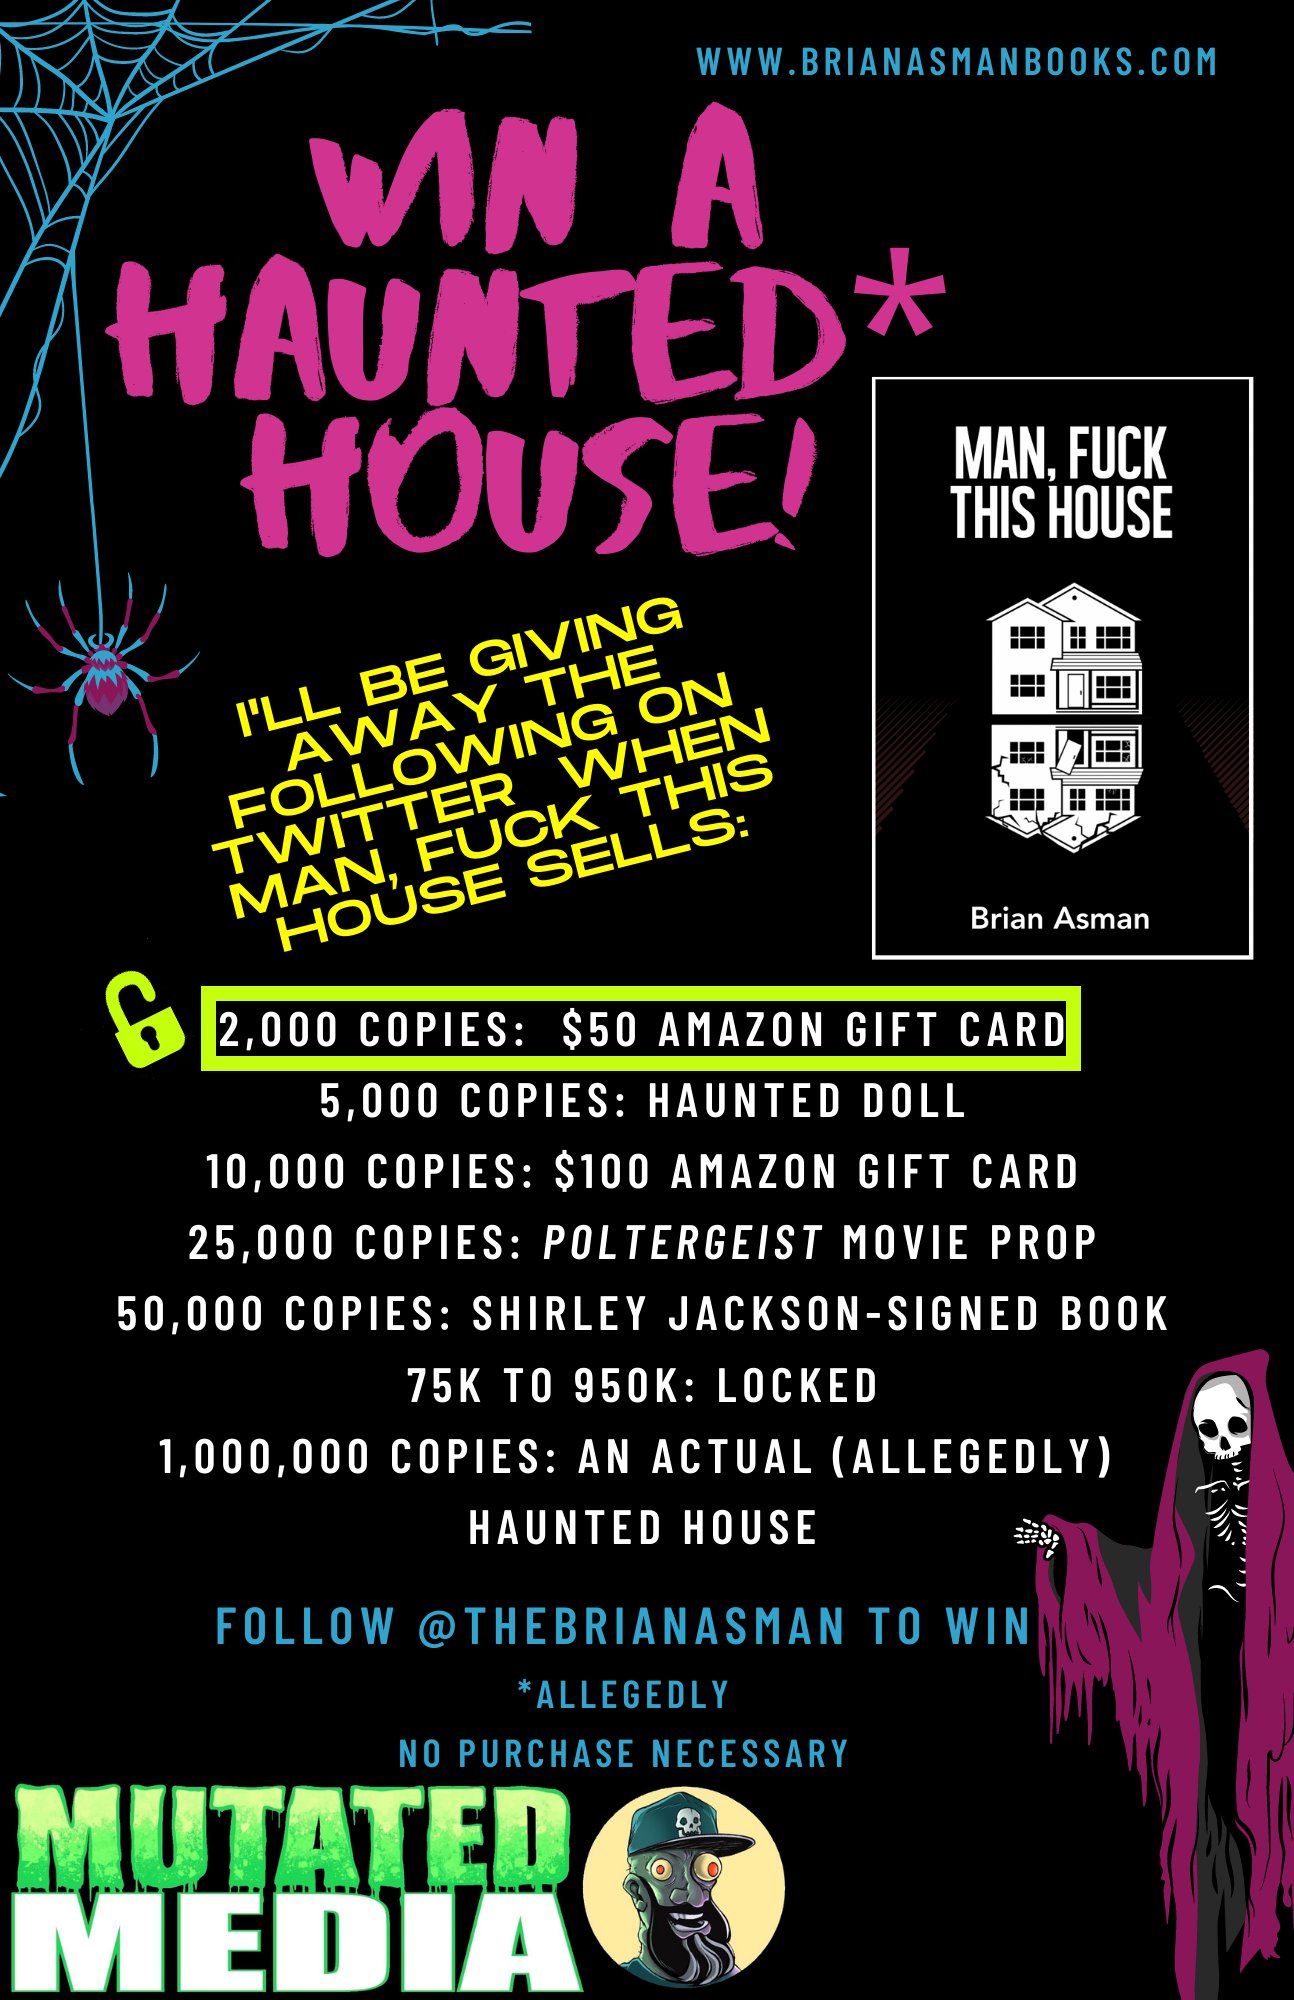 Brian Asman on X: *CONTEST UPDATE* First step goal in my Win a Haunted  House contest is unlocked! Giving away a ton of cool prizes to promote my  book MAN, FUCK THIS